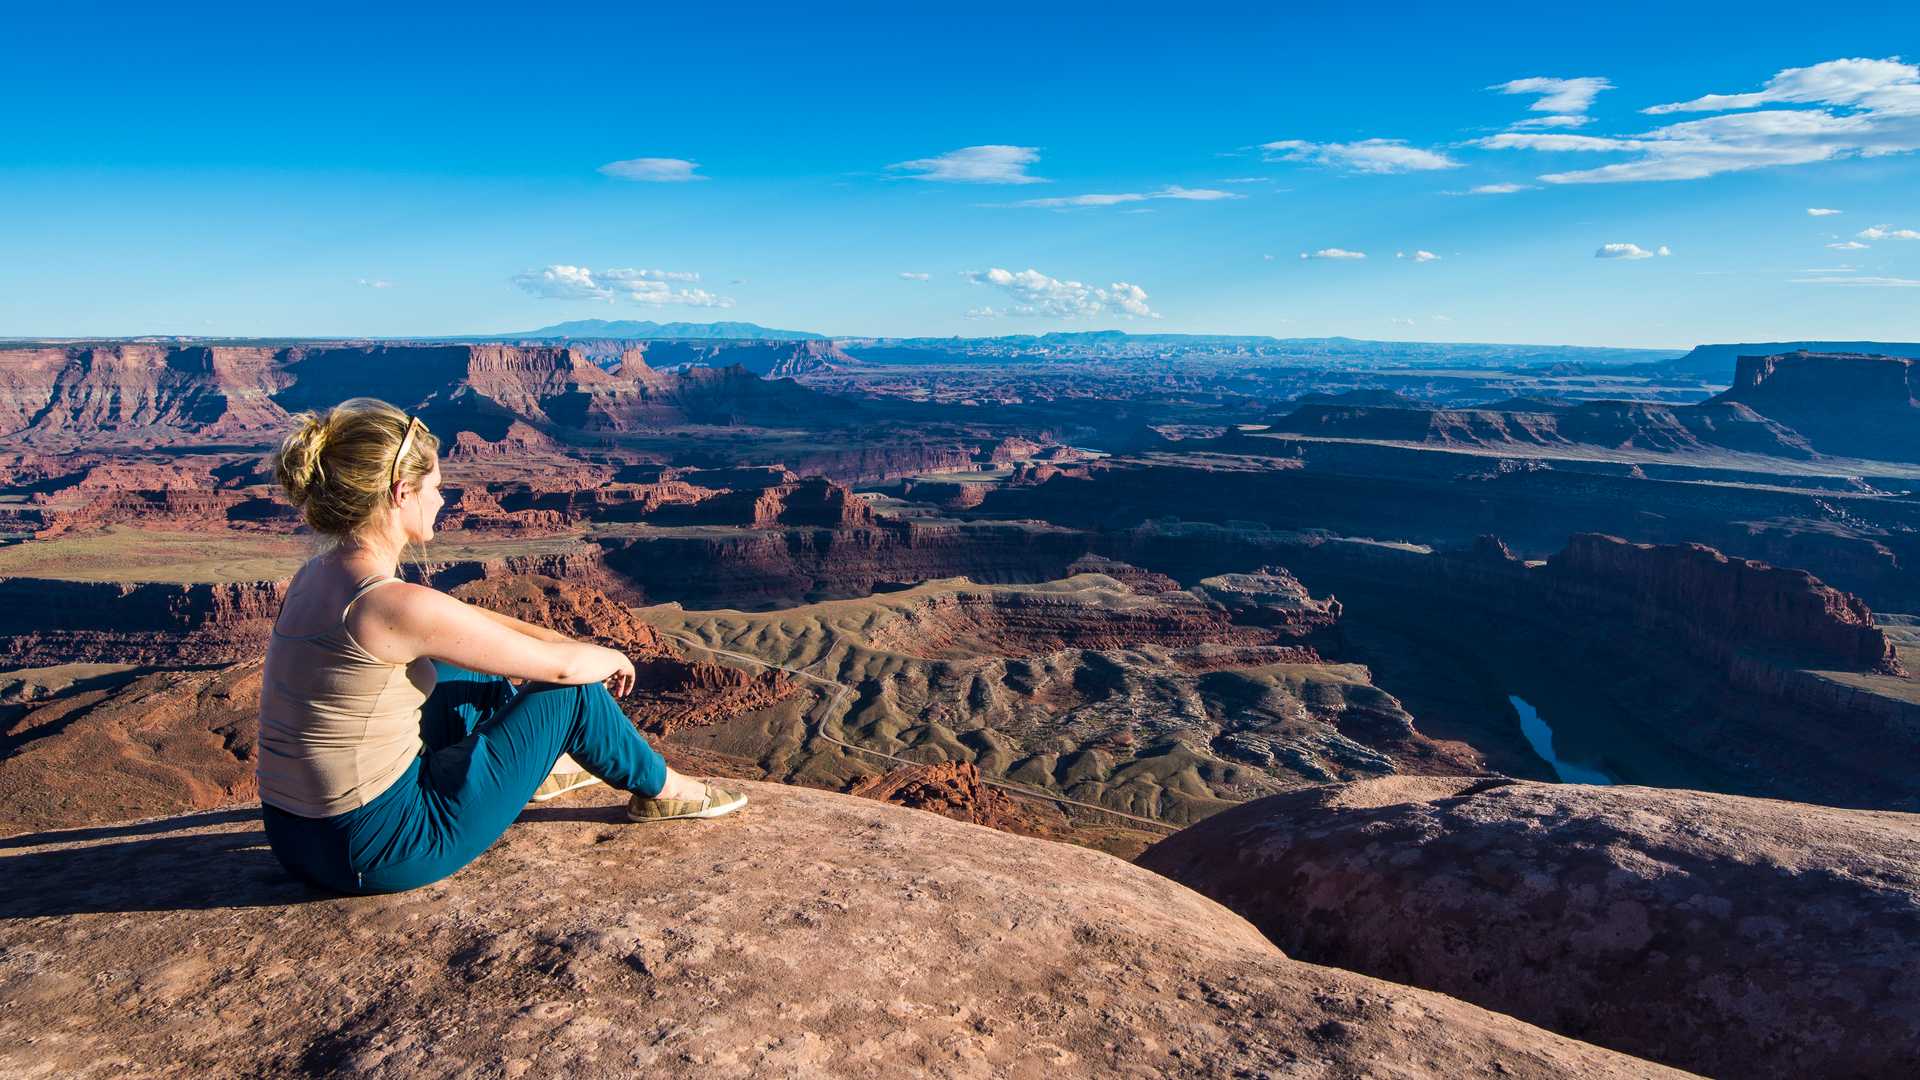 dead-horse-point-usa-utah-woman-at-a-overlook-over-the-canyonland-2022-12-16-22-42-38-utc.jpg